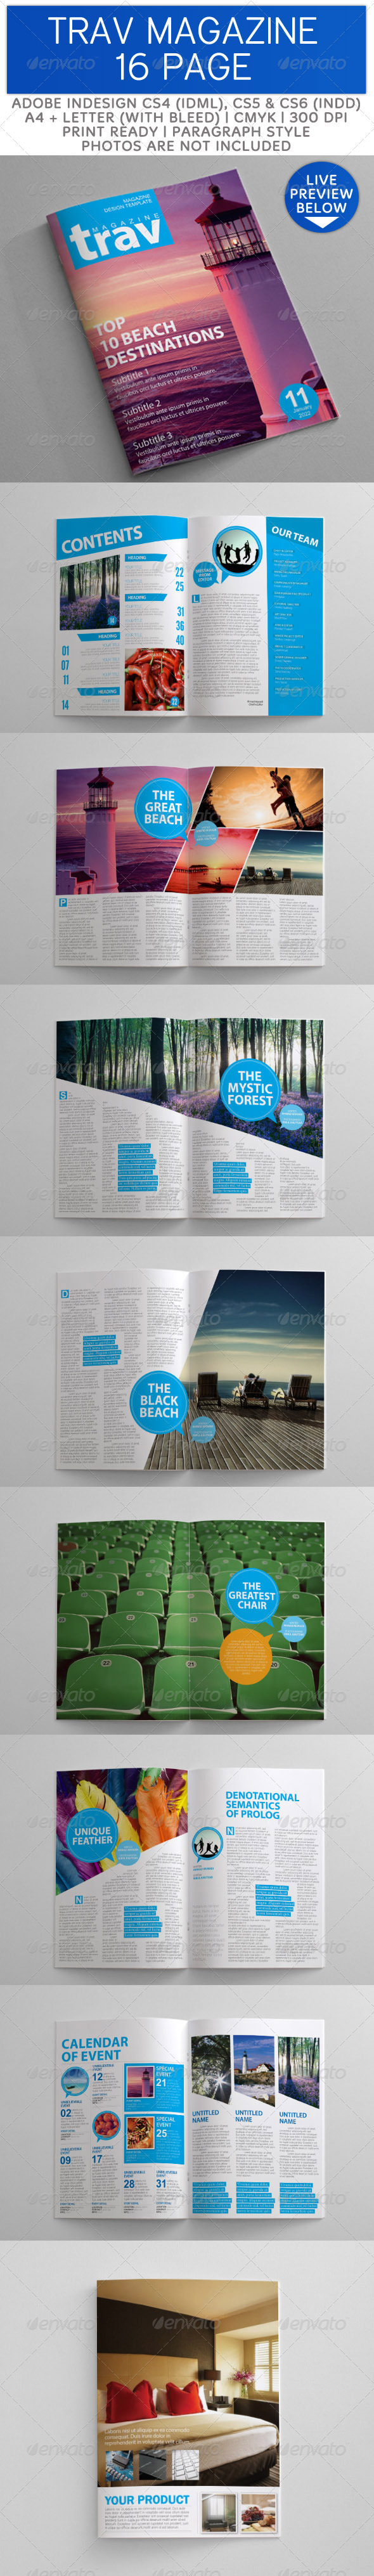 magazine templates for pages